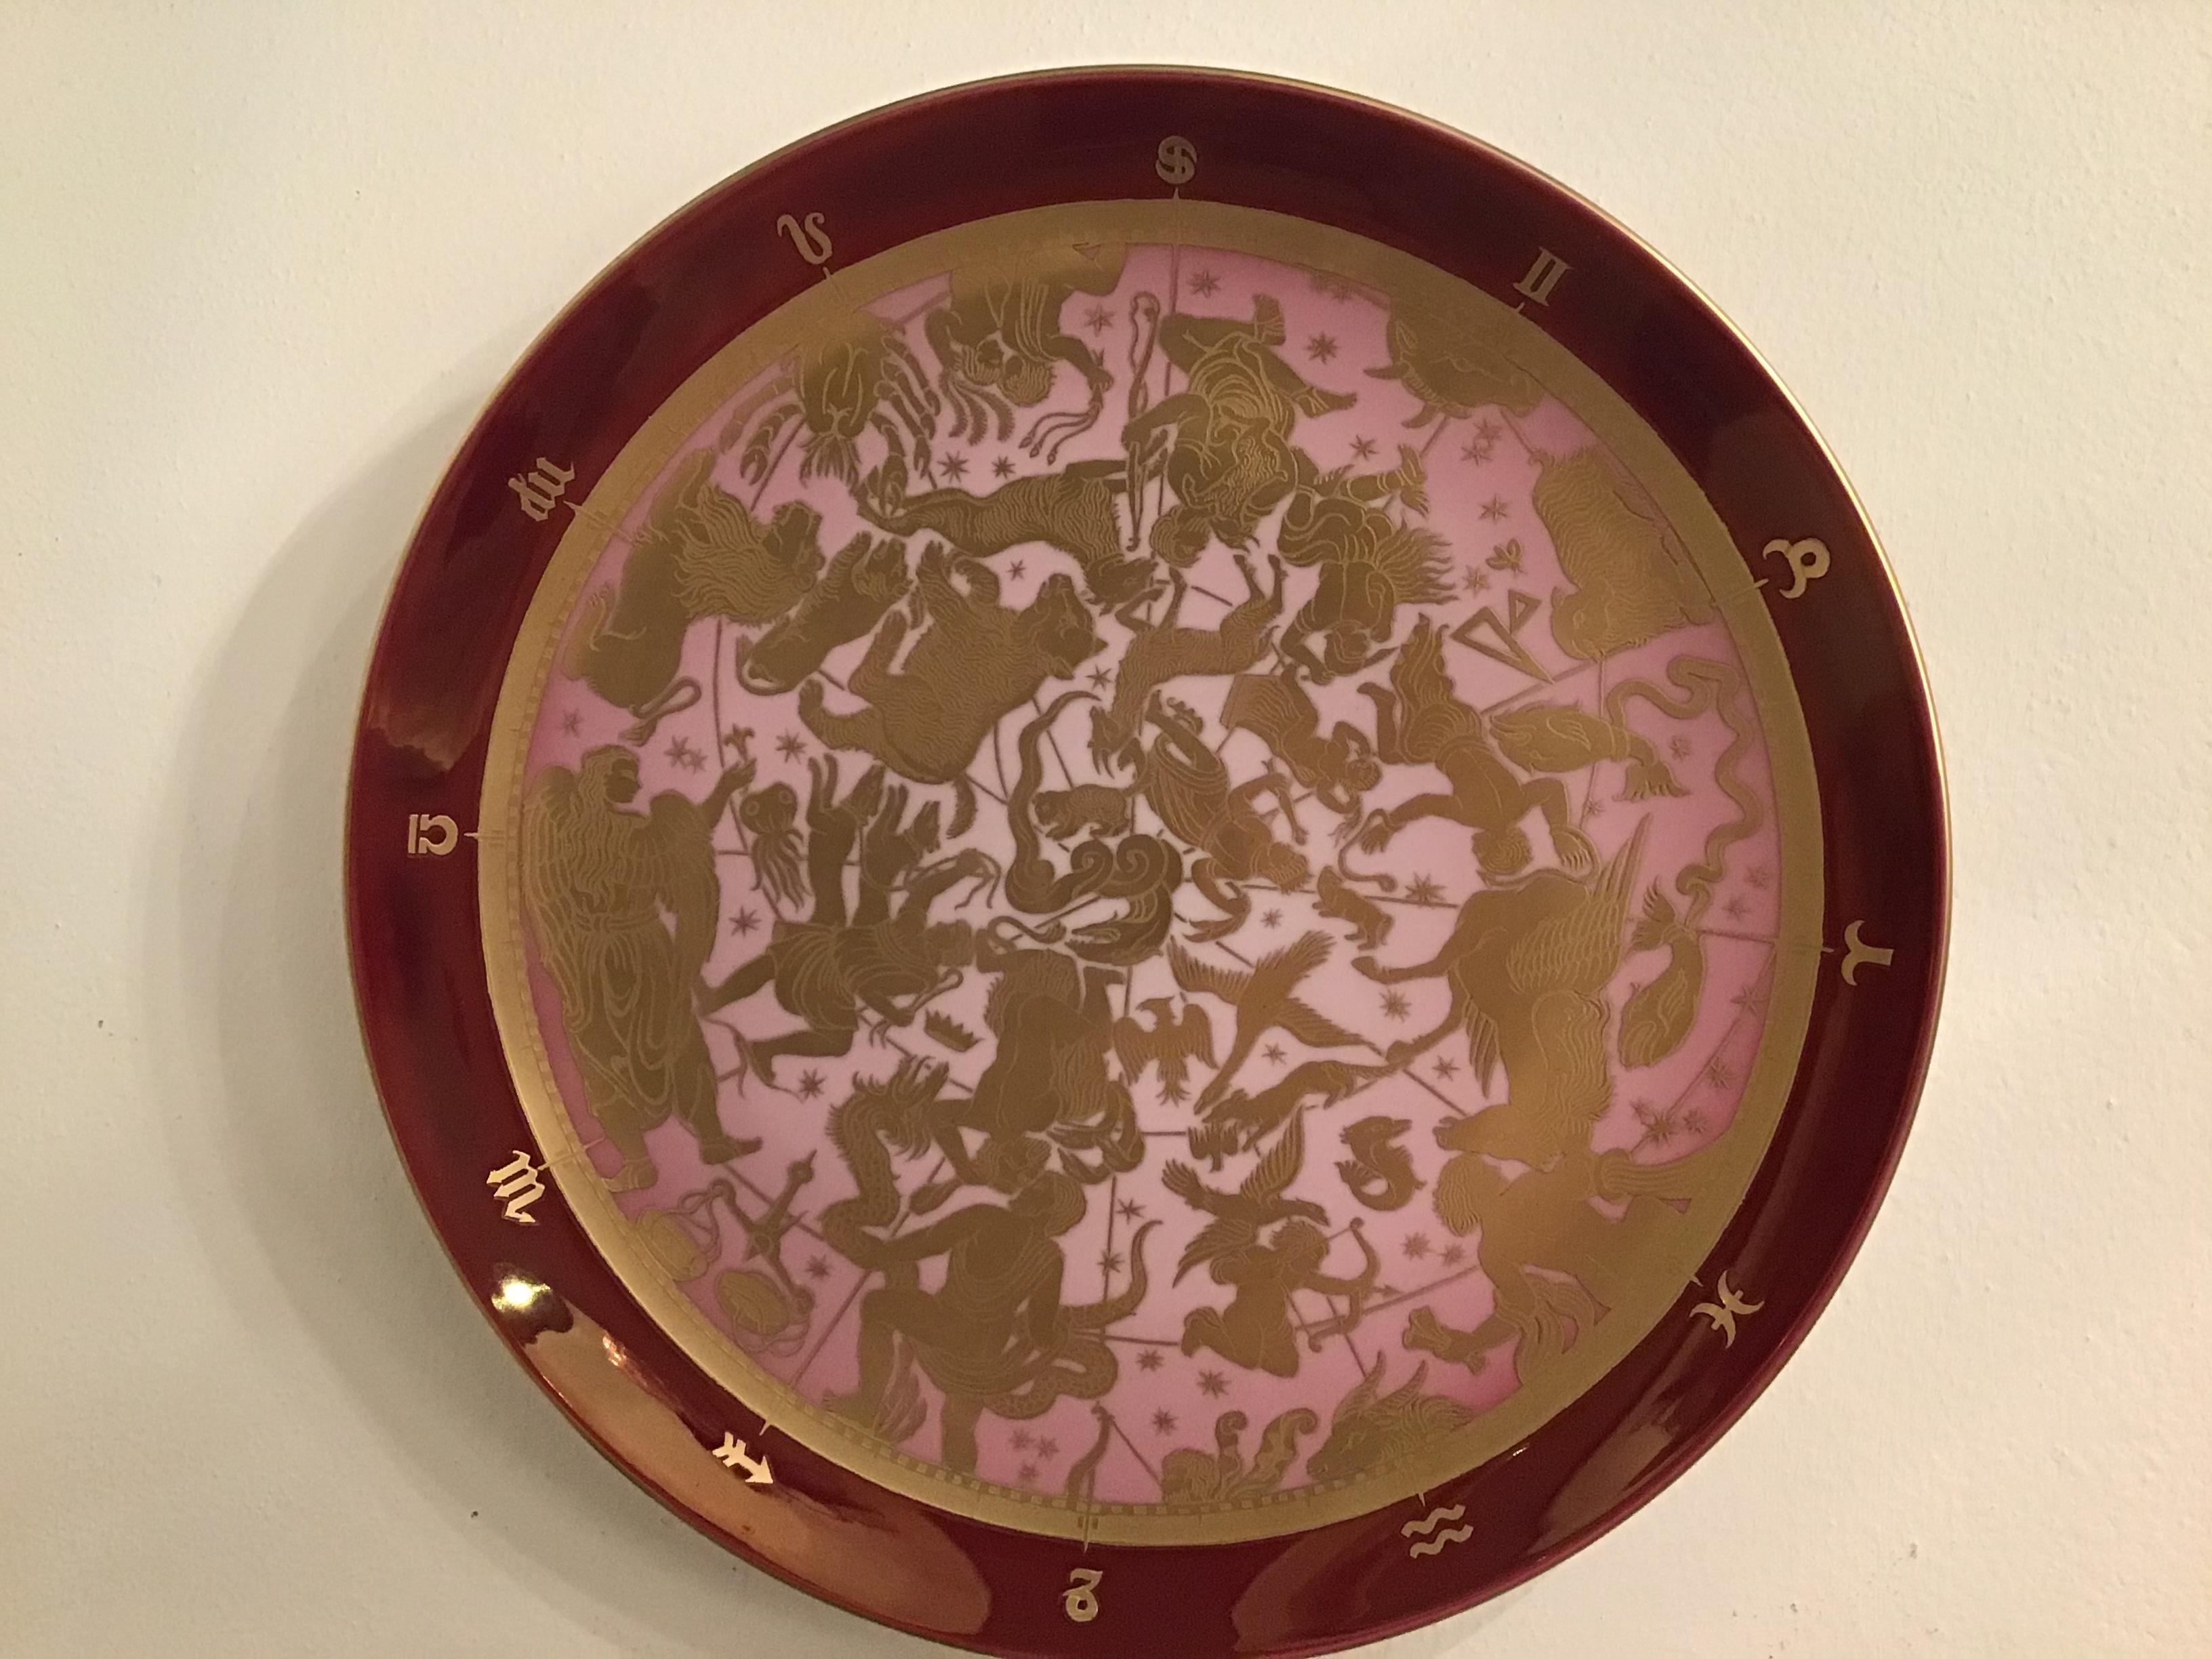 Morbelli Porcelain Wall Plate “Planisfero Celeste” Worked with Pure Gold 1960 It For Sale 1